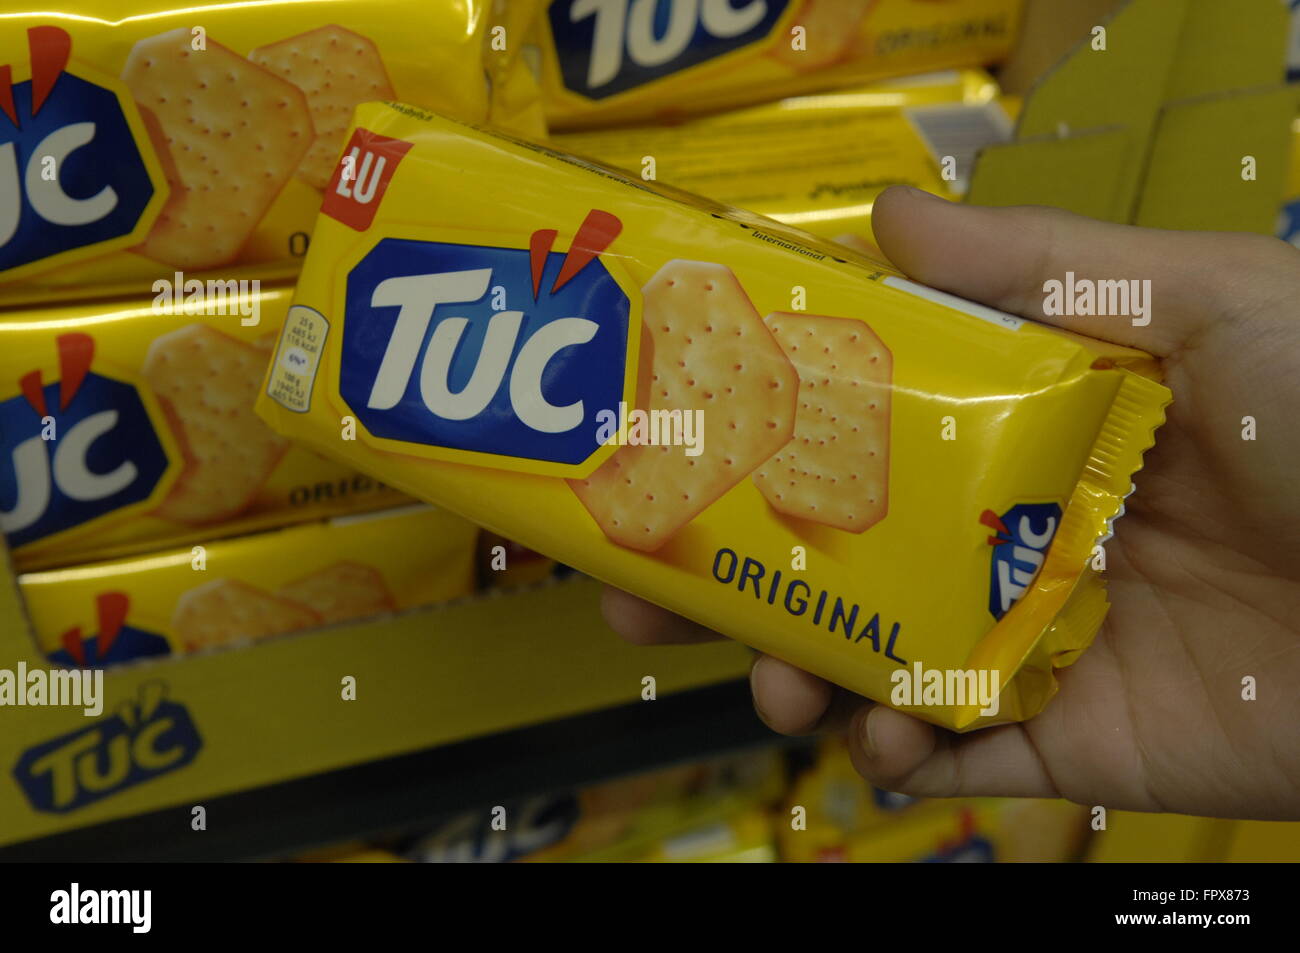 Tuc snack biscuits original made by Jacob Fruitfield Food Group, part of the Valeo Foods Group, Stock Photo